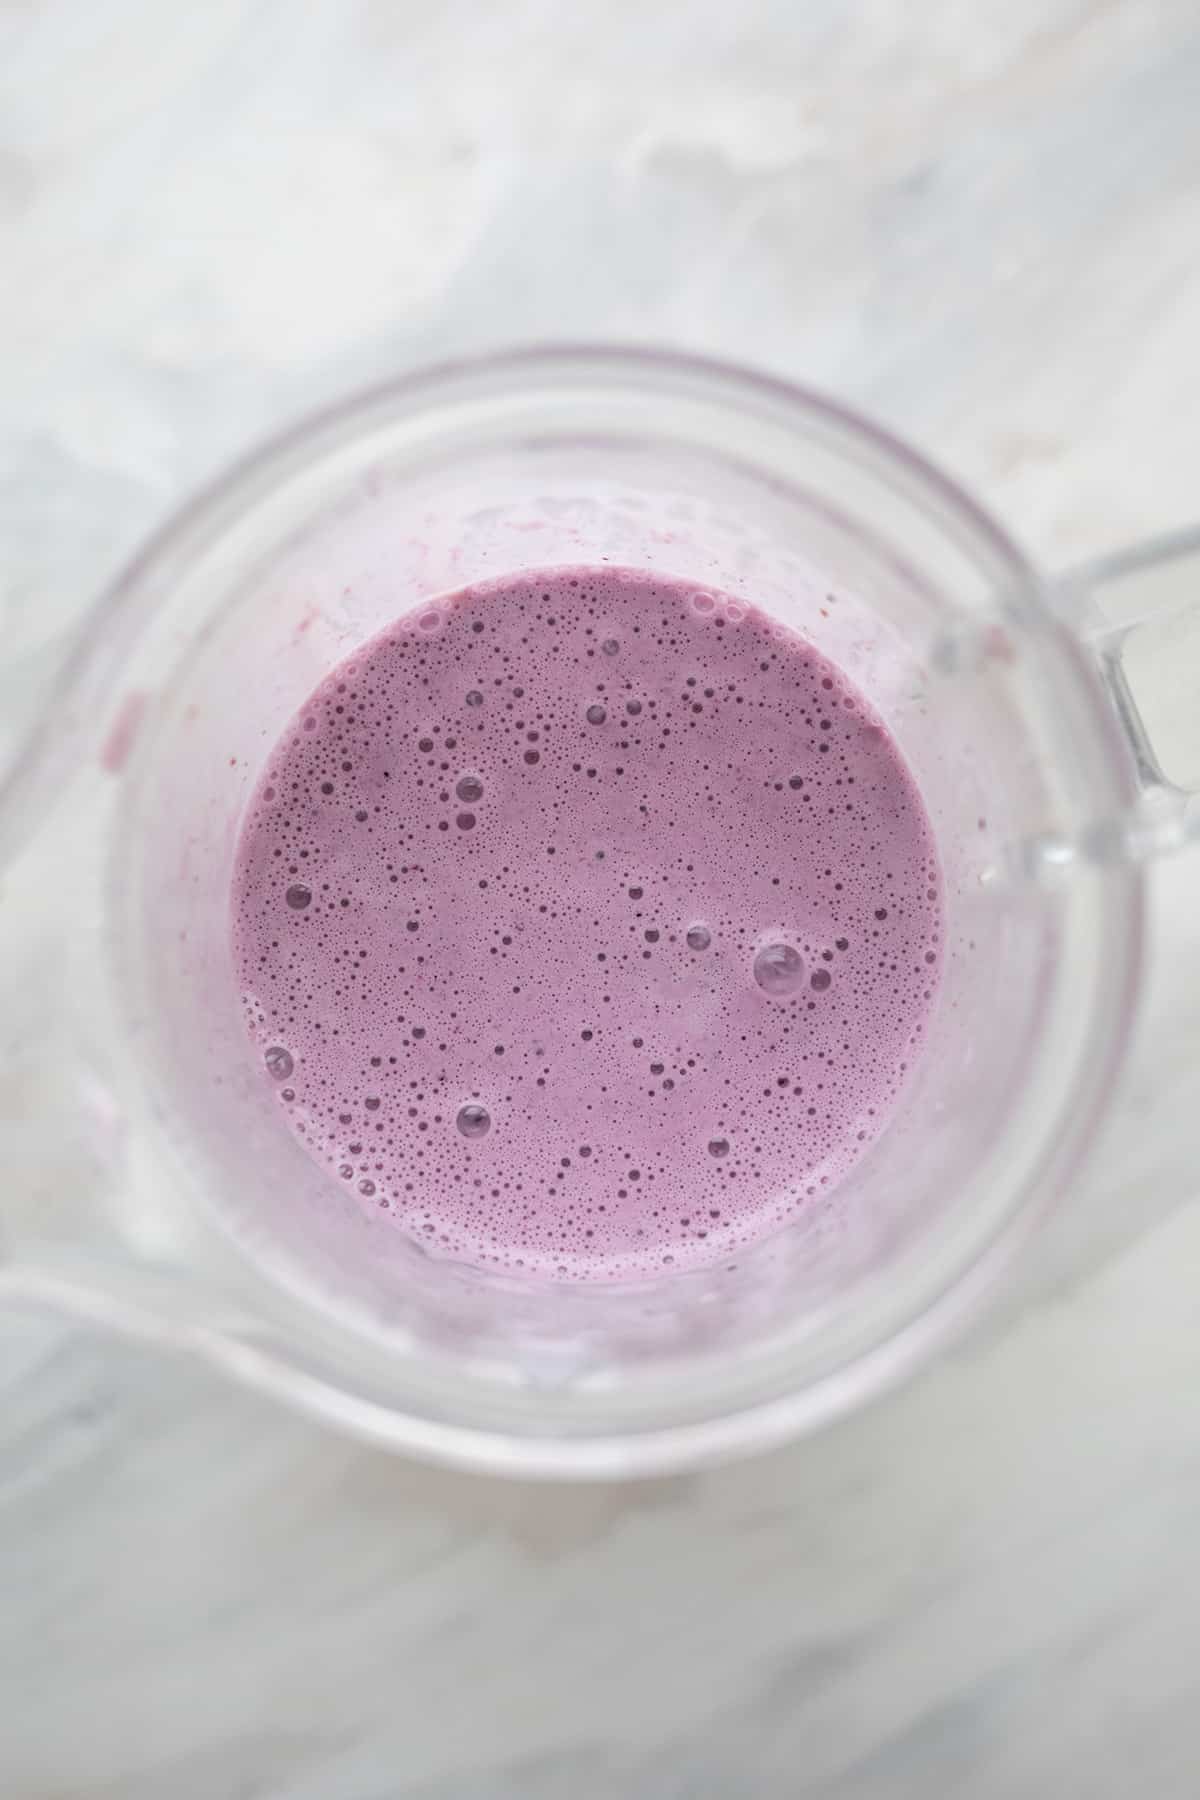 Top down image of keto blueberry smoothie in the blender.